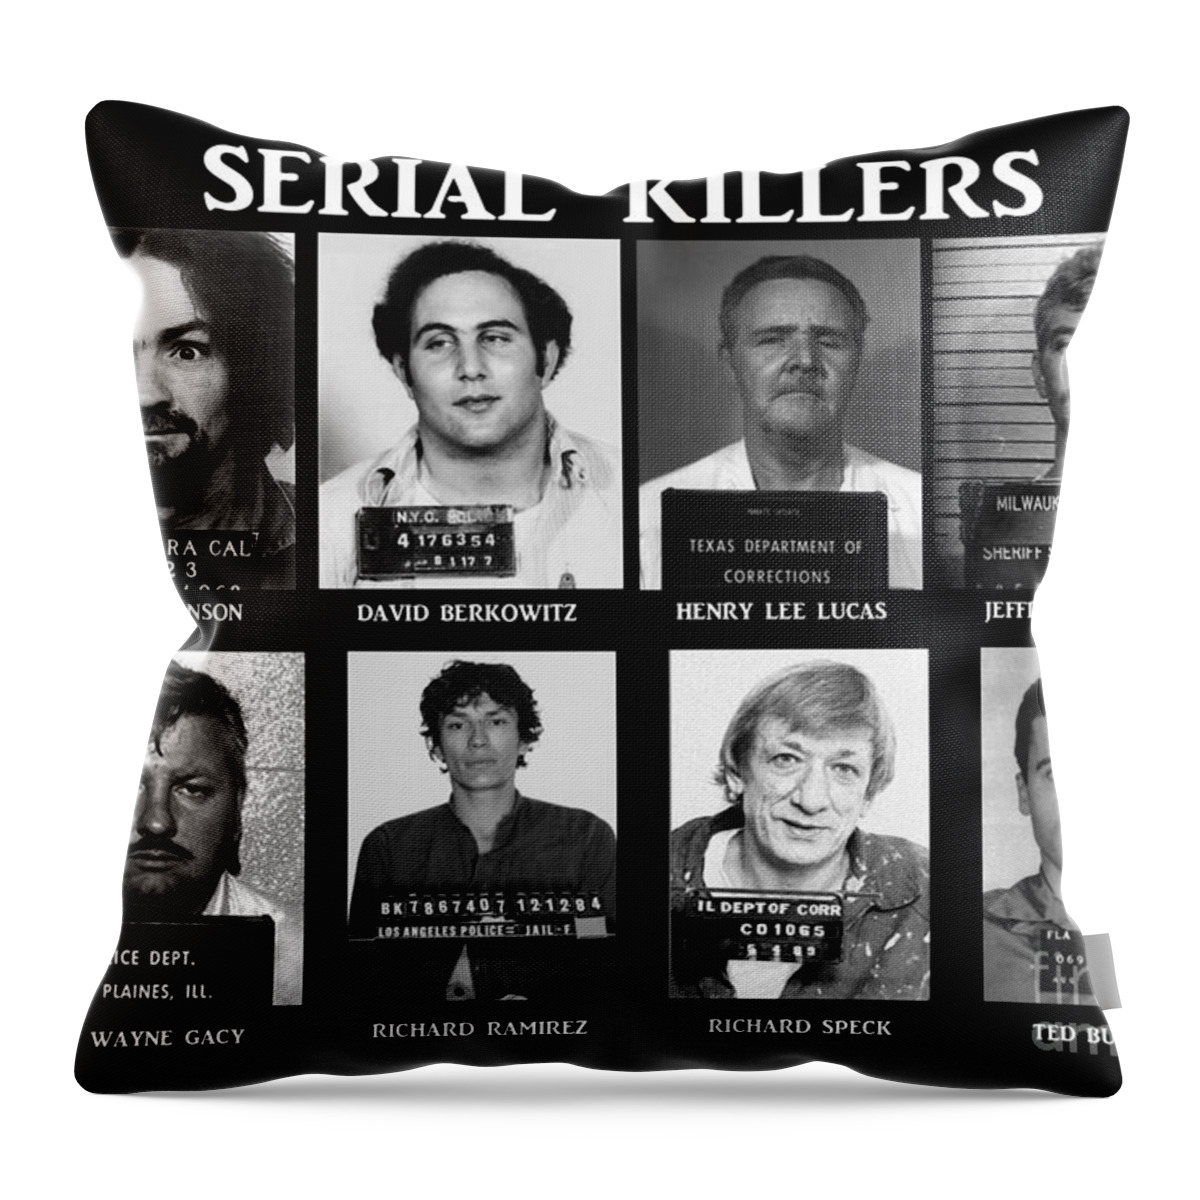 Paul Ward Throw Pillow featuring the photograph Serial Killers - Public Enemies by Paul Ward